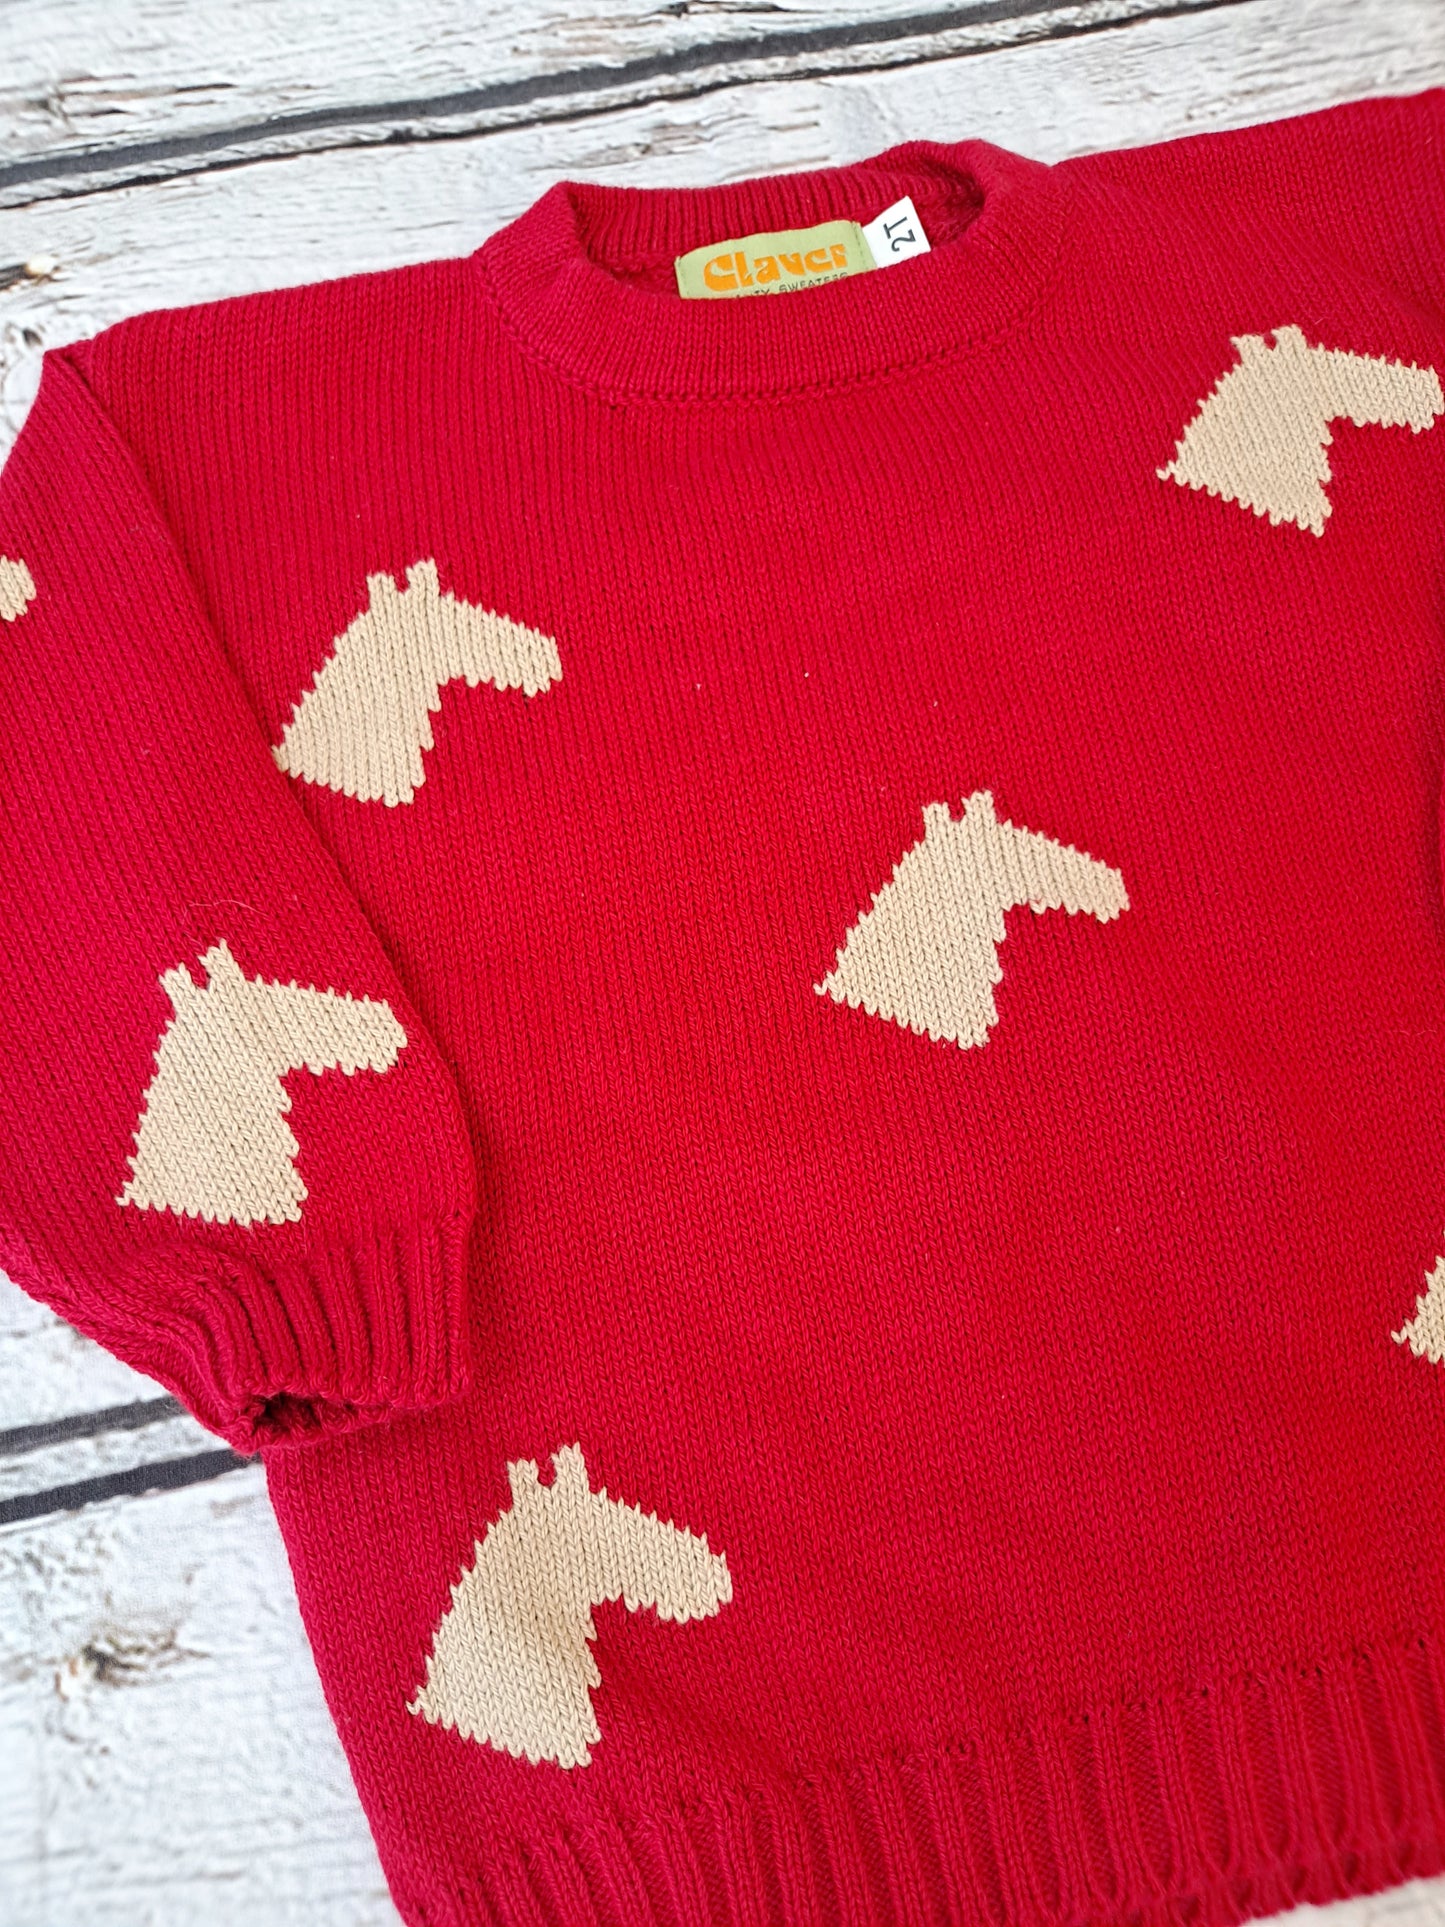 Claver - Horse Head Silhouettes Red Crewneck Sweater